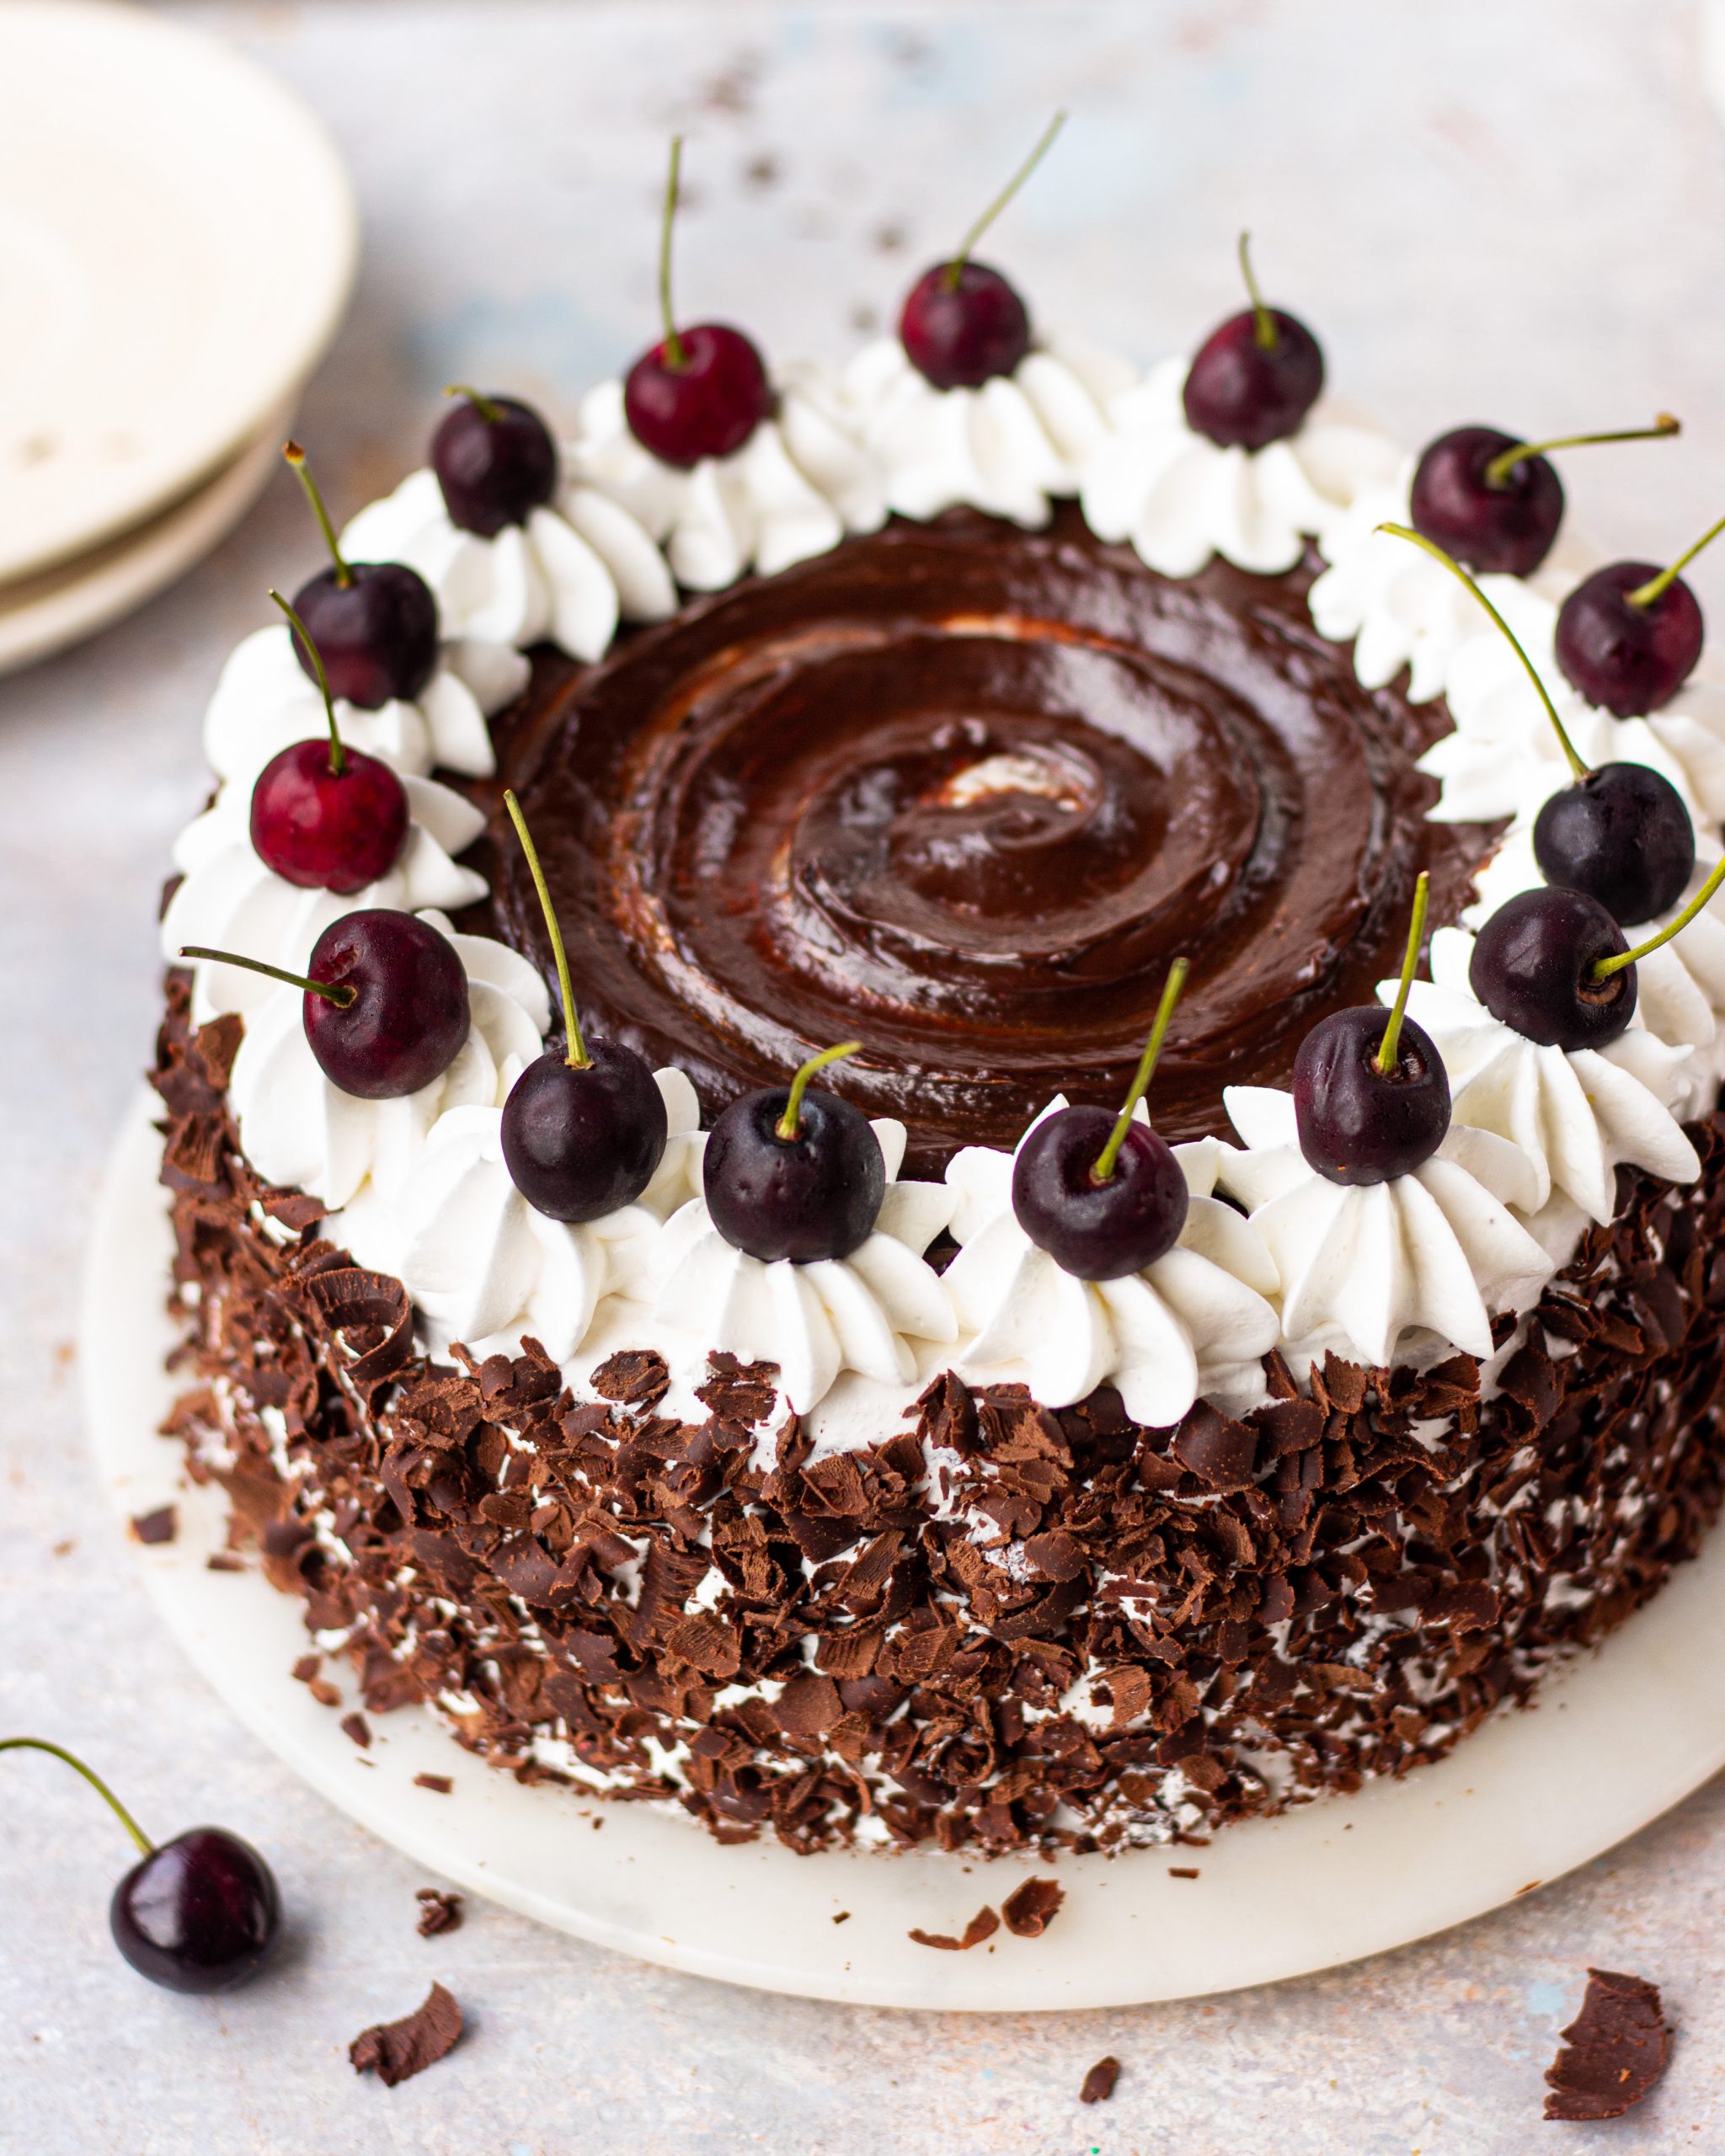 German Black Forest Cake Recipe: How to Make It